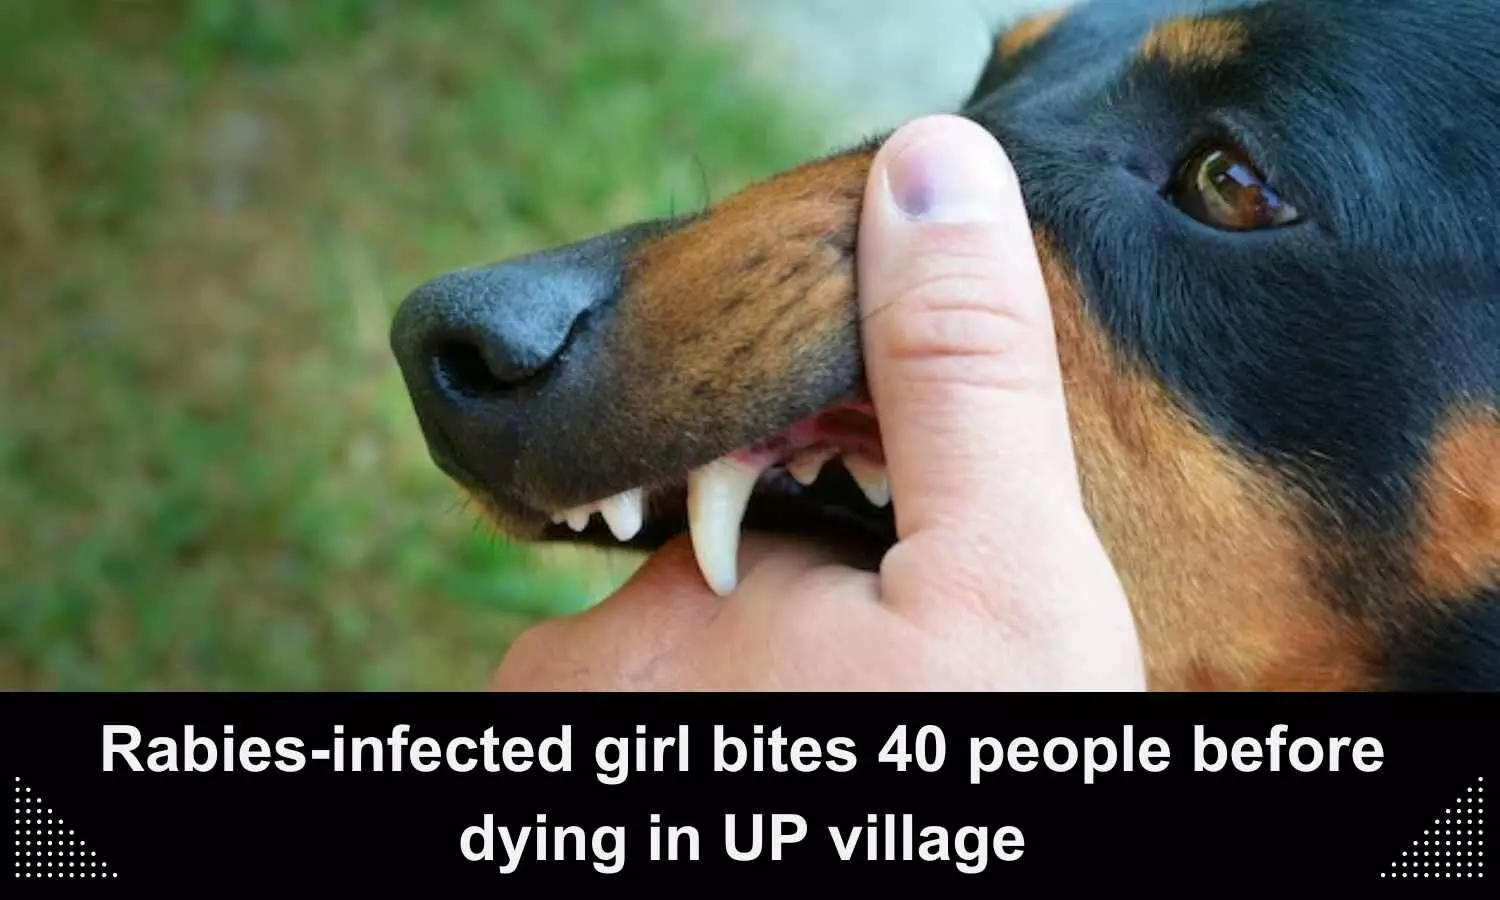 Rabies-infected girl bites 40 people before dying in UP village